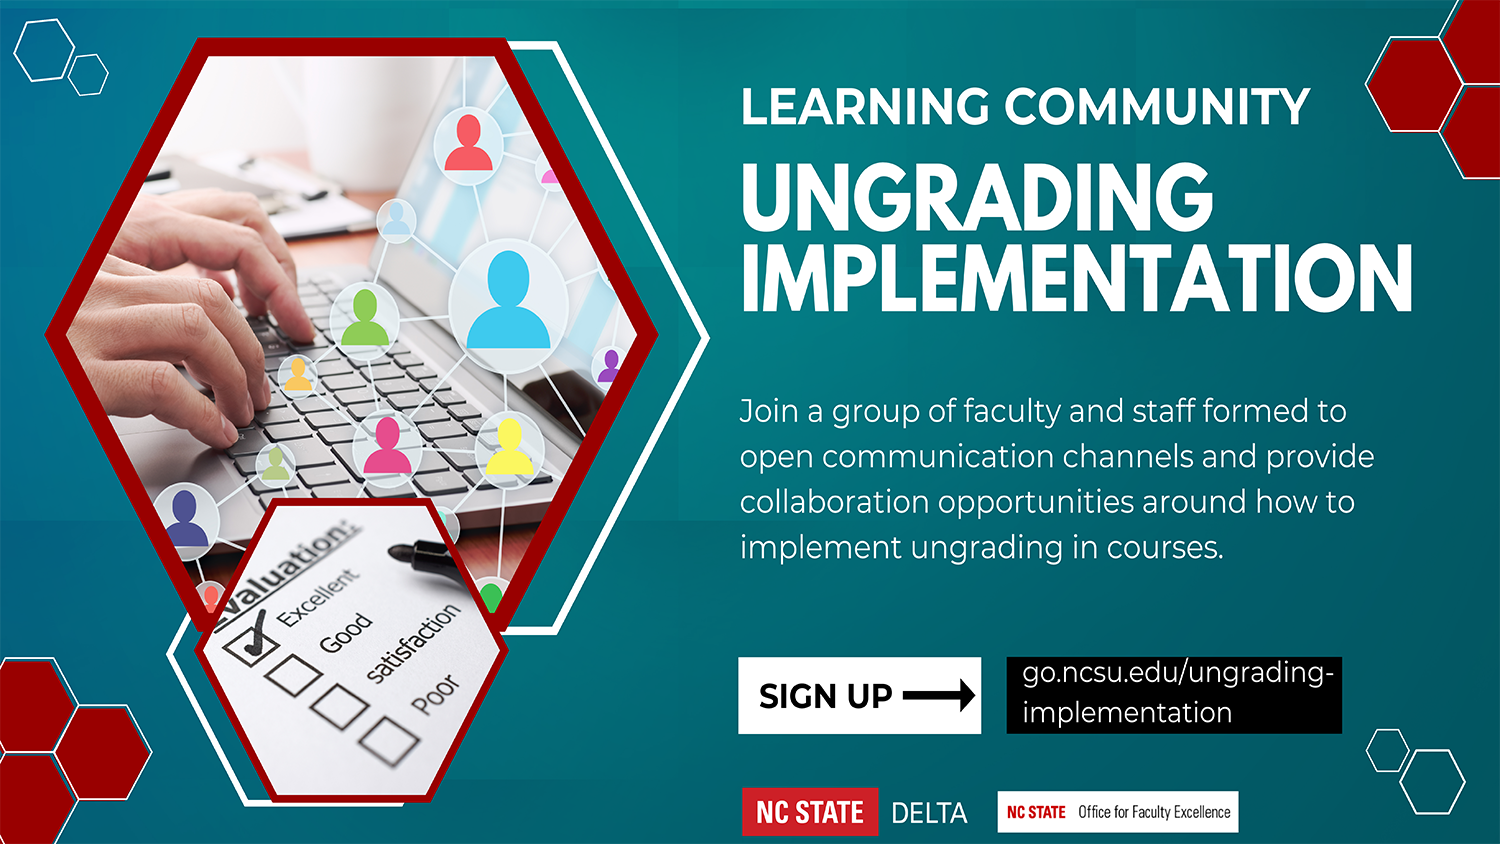 LEARNING COMMUNITY UNGRADING IMPLEMENTATION Join a group of faculty and staff formed to open communication channels and provide collaboration opportunities around how to implement ungrading in courses.